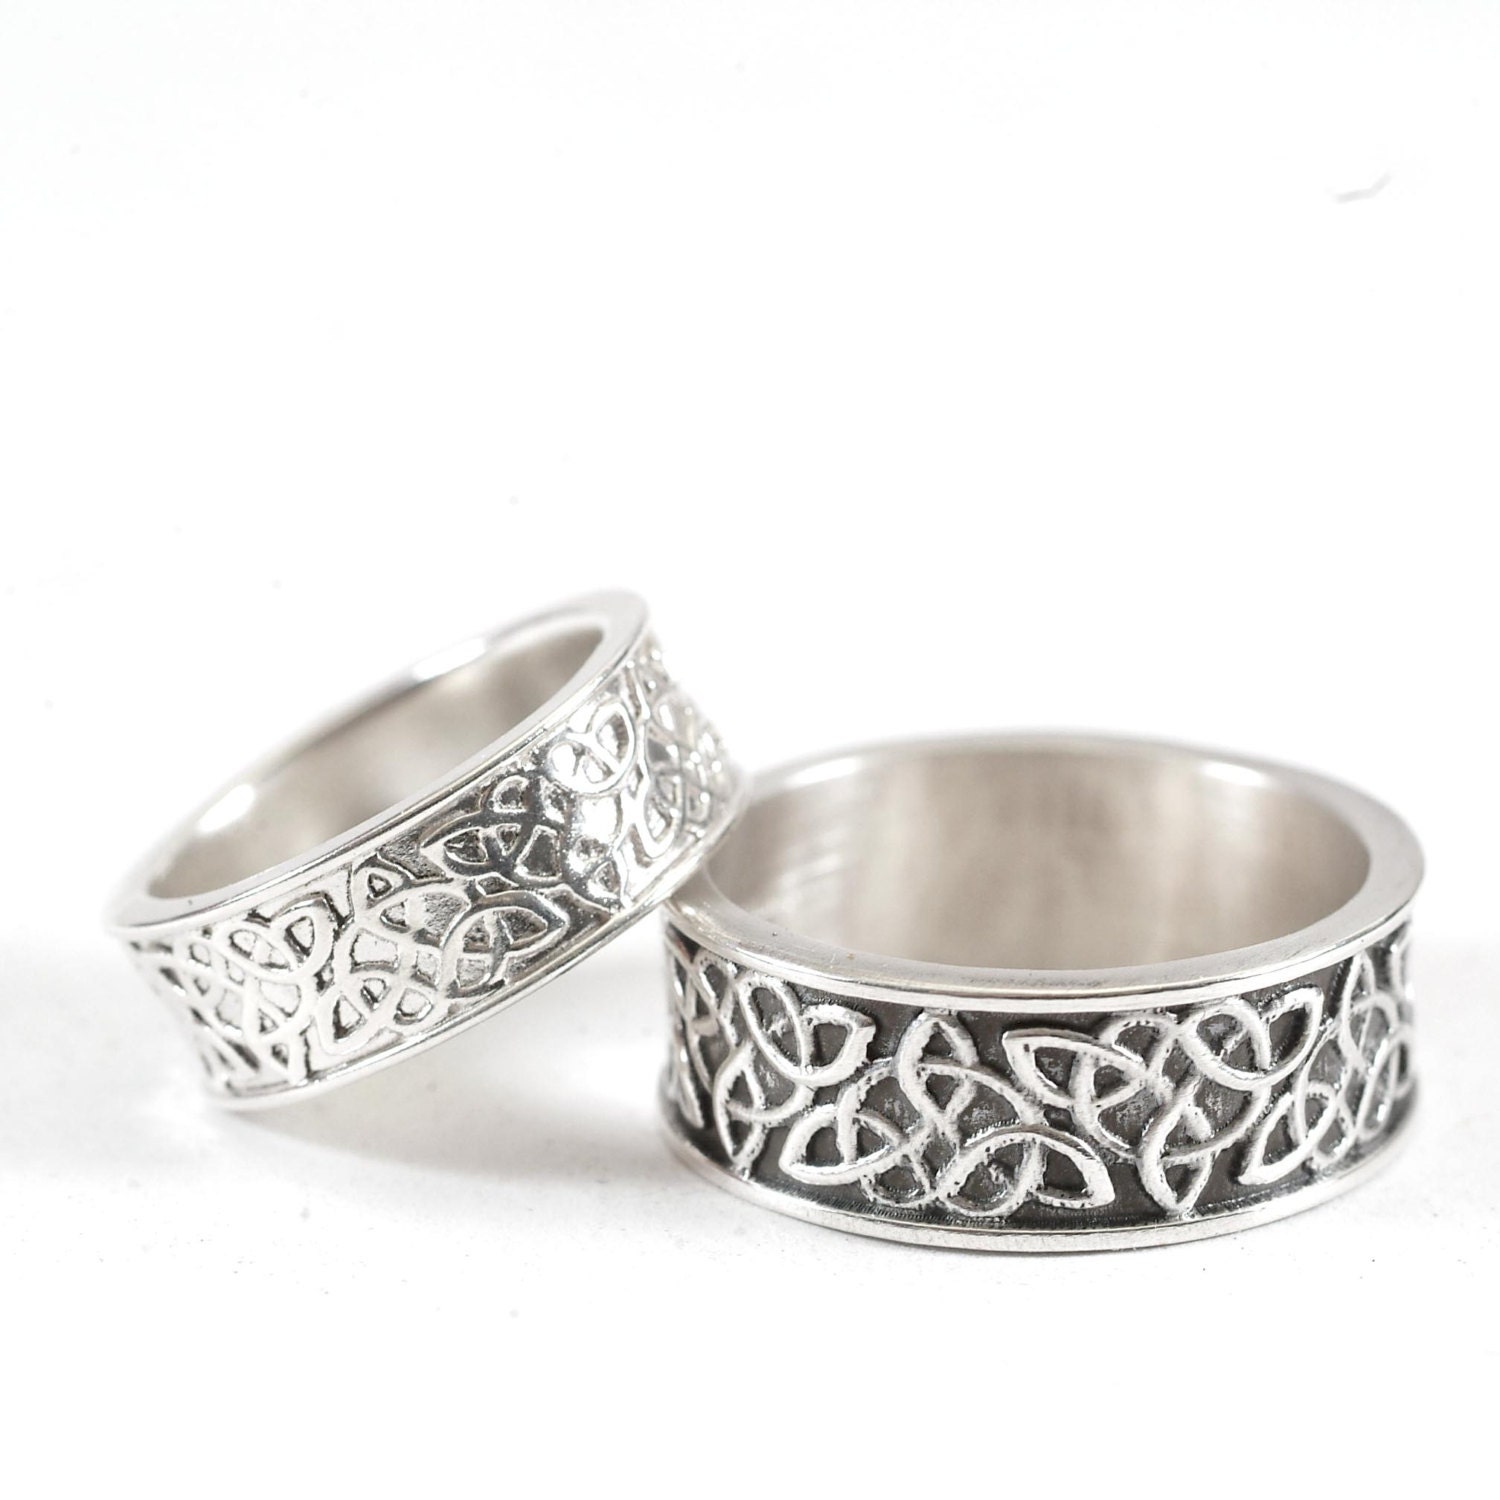 Celtic Wedding Ring Set With Raised Relief by CelticEternity